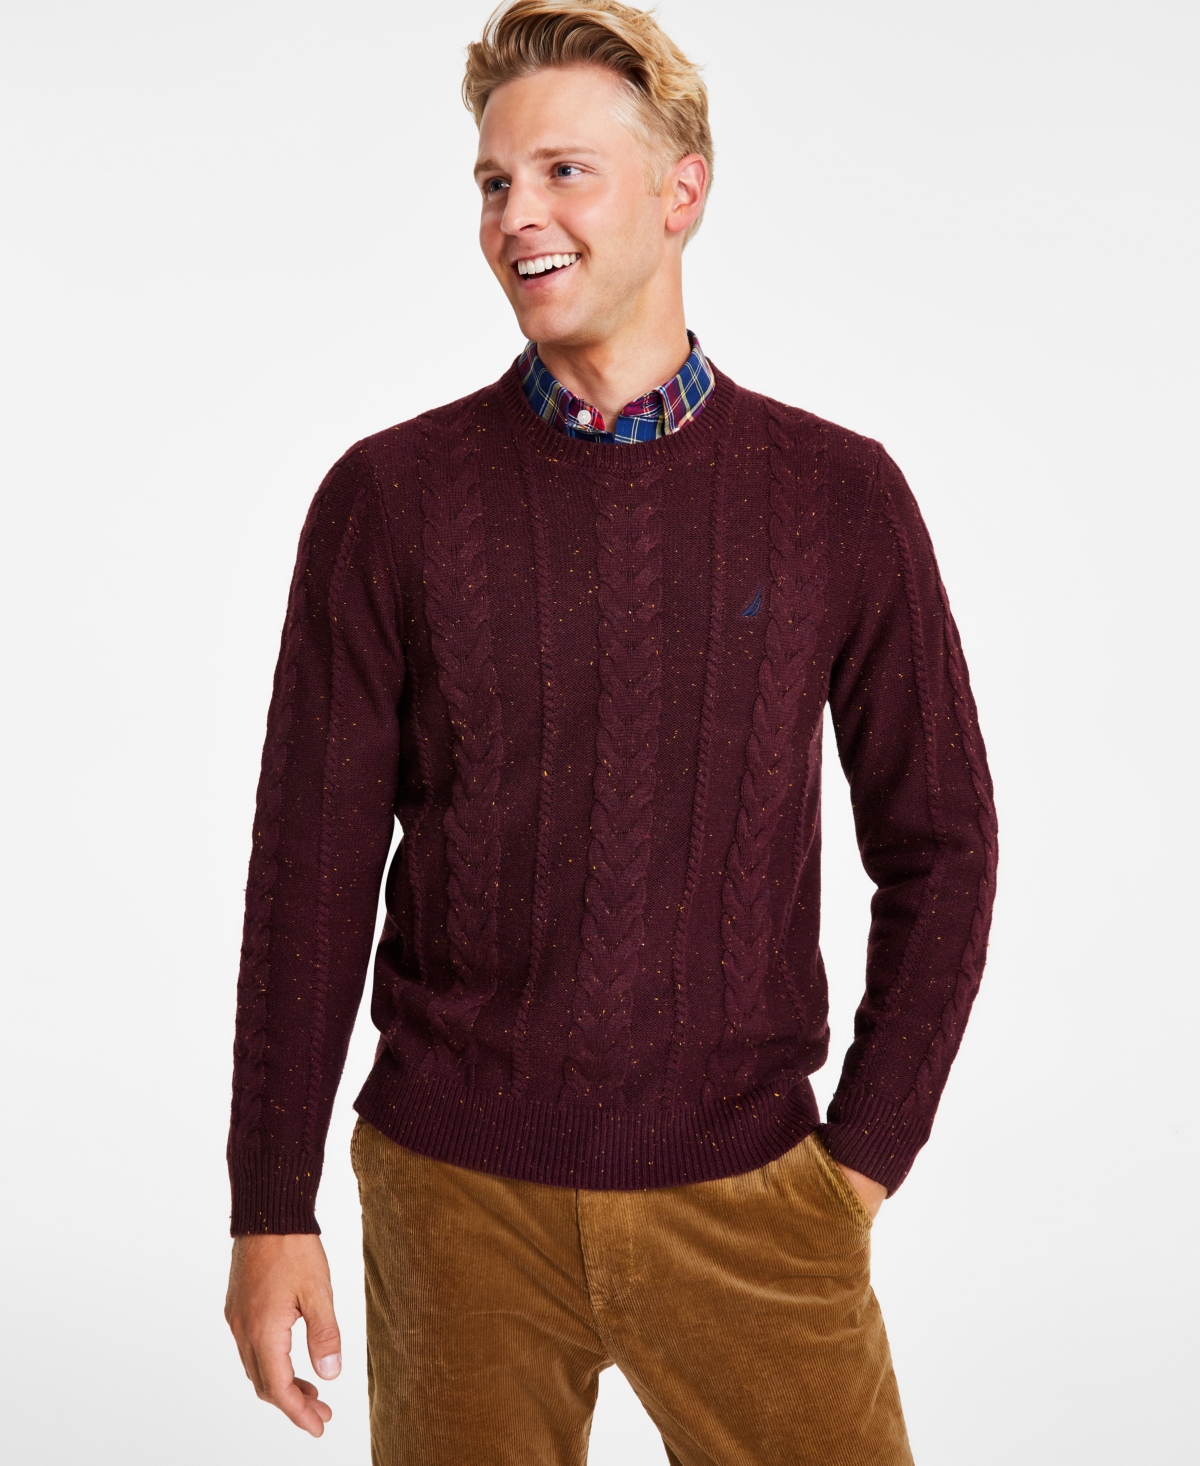 Men's Cable Knit Pullover Crewneck Sweater - Shipwreck Burgundy